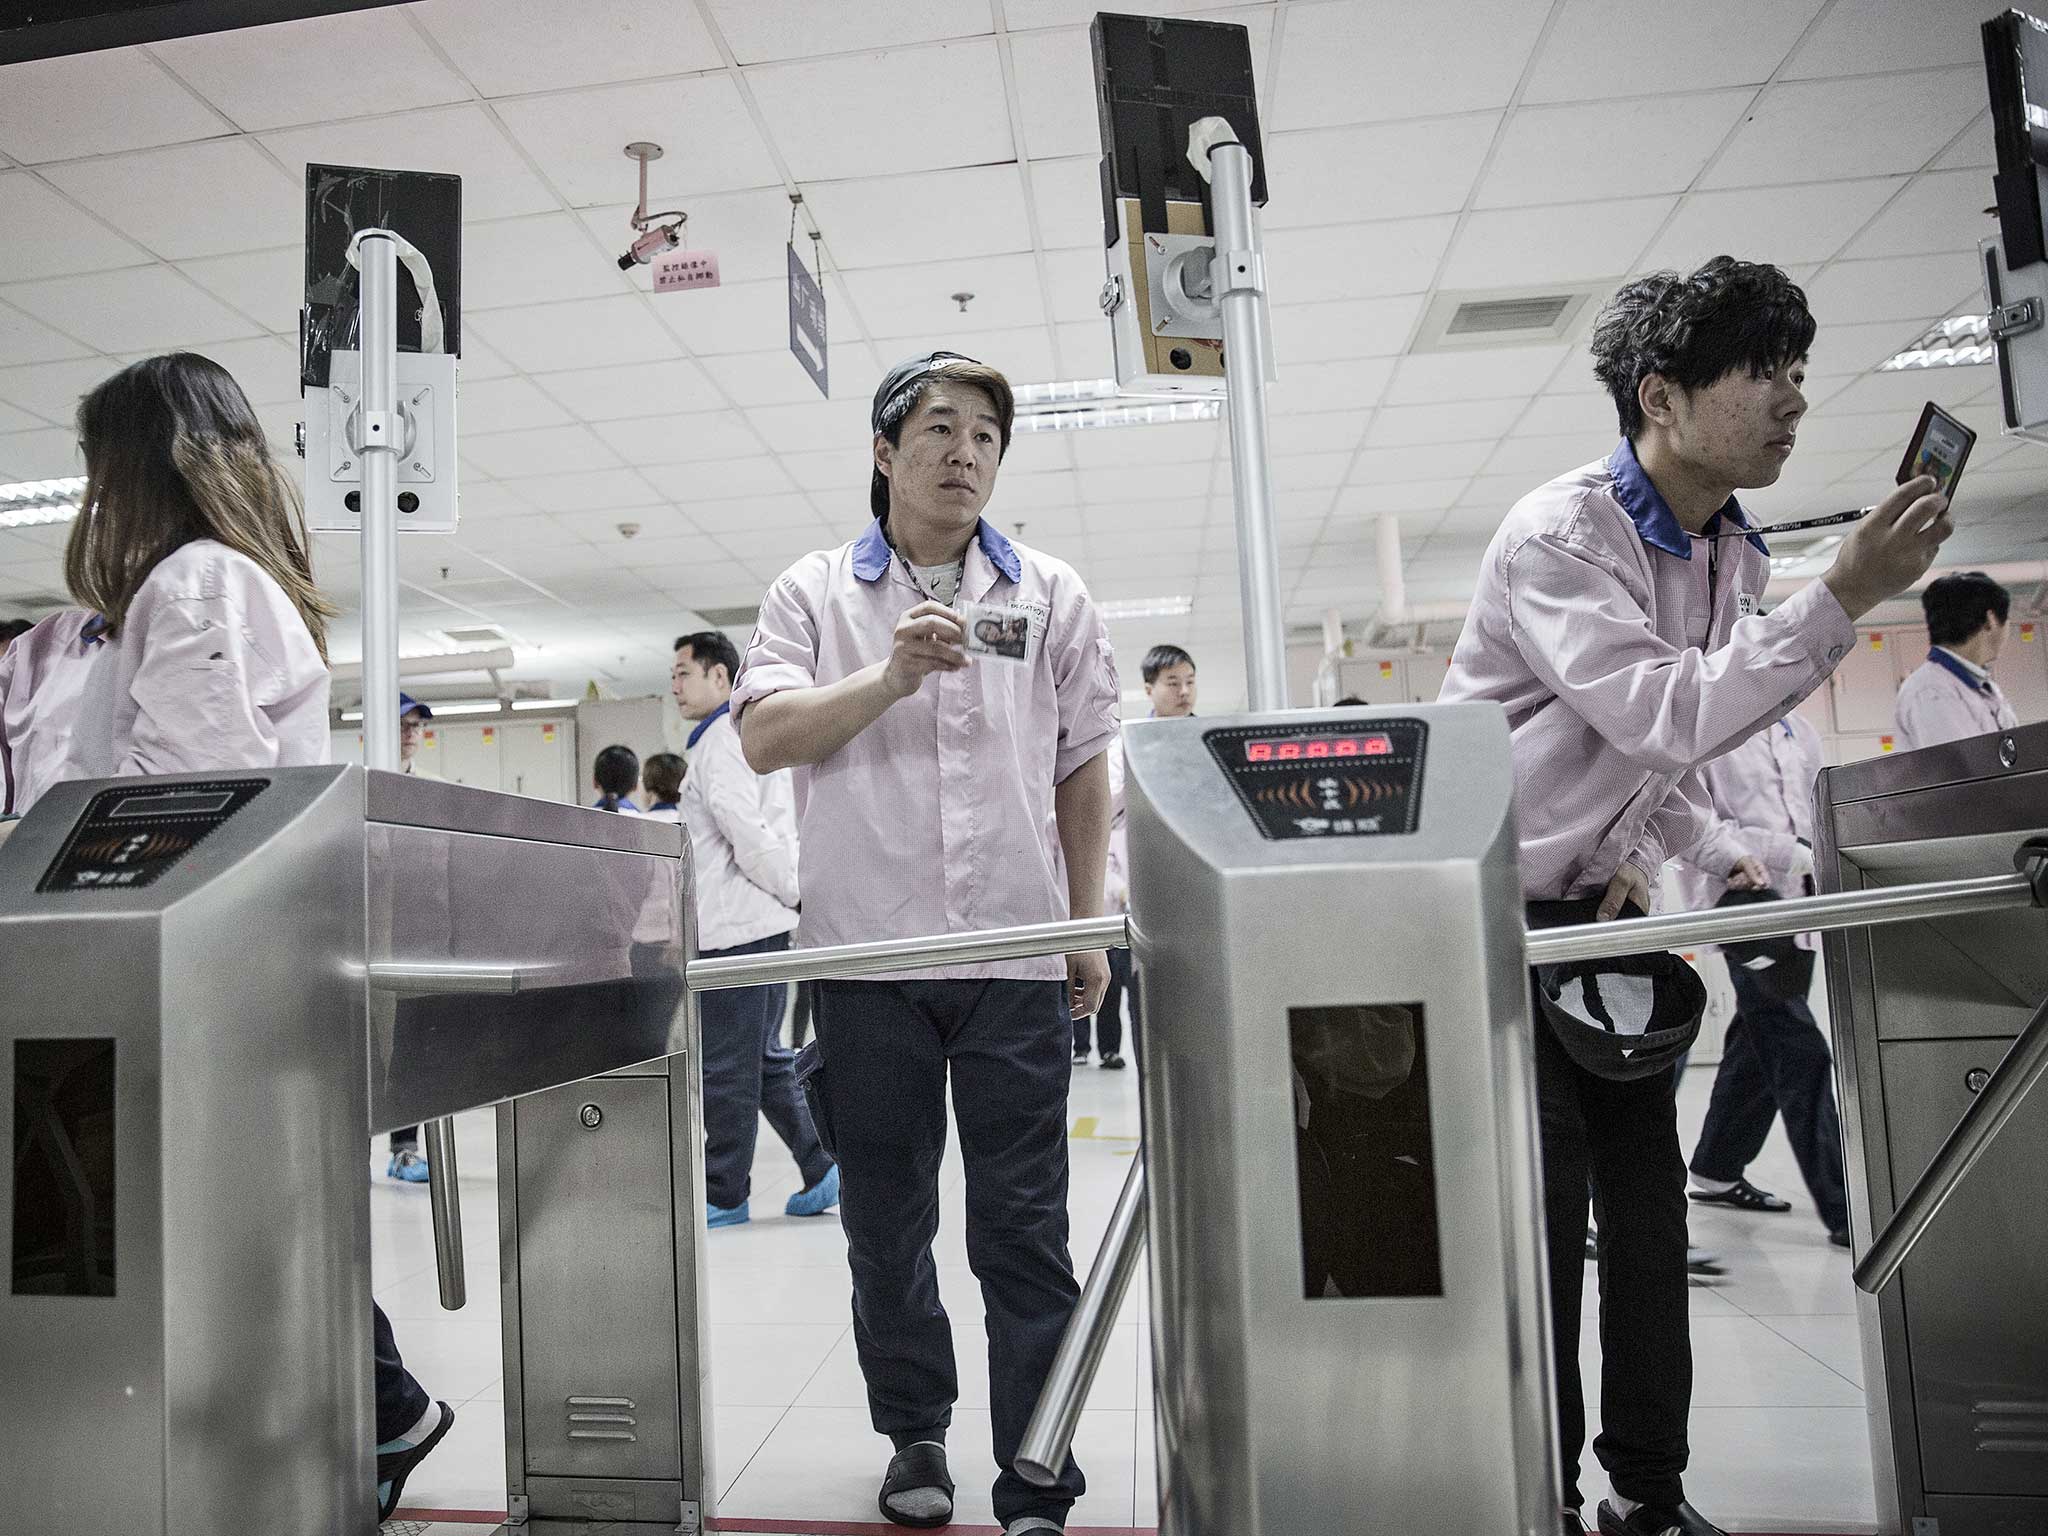 Employees look into facial recognition devices as they swipe their badges to enter the assembly line area at a Pegatron Corp. factory in Shanghai, China